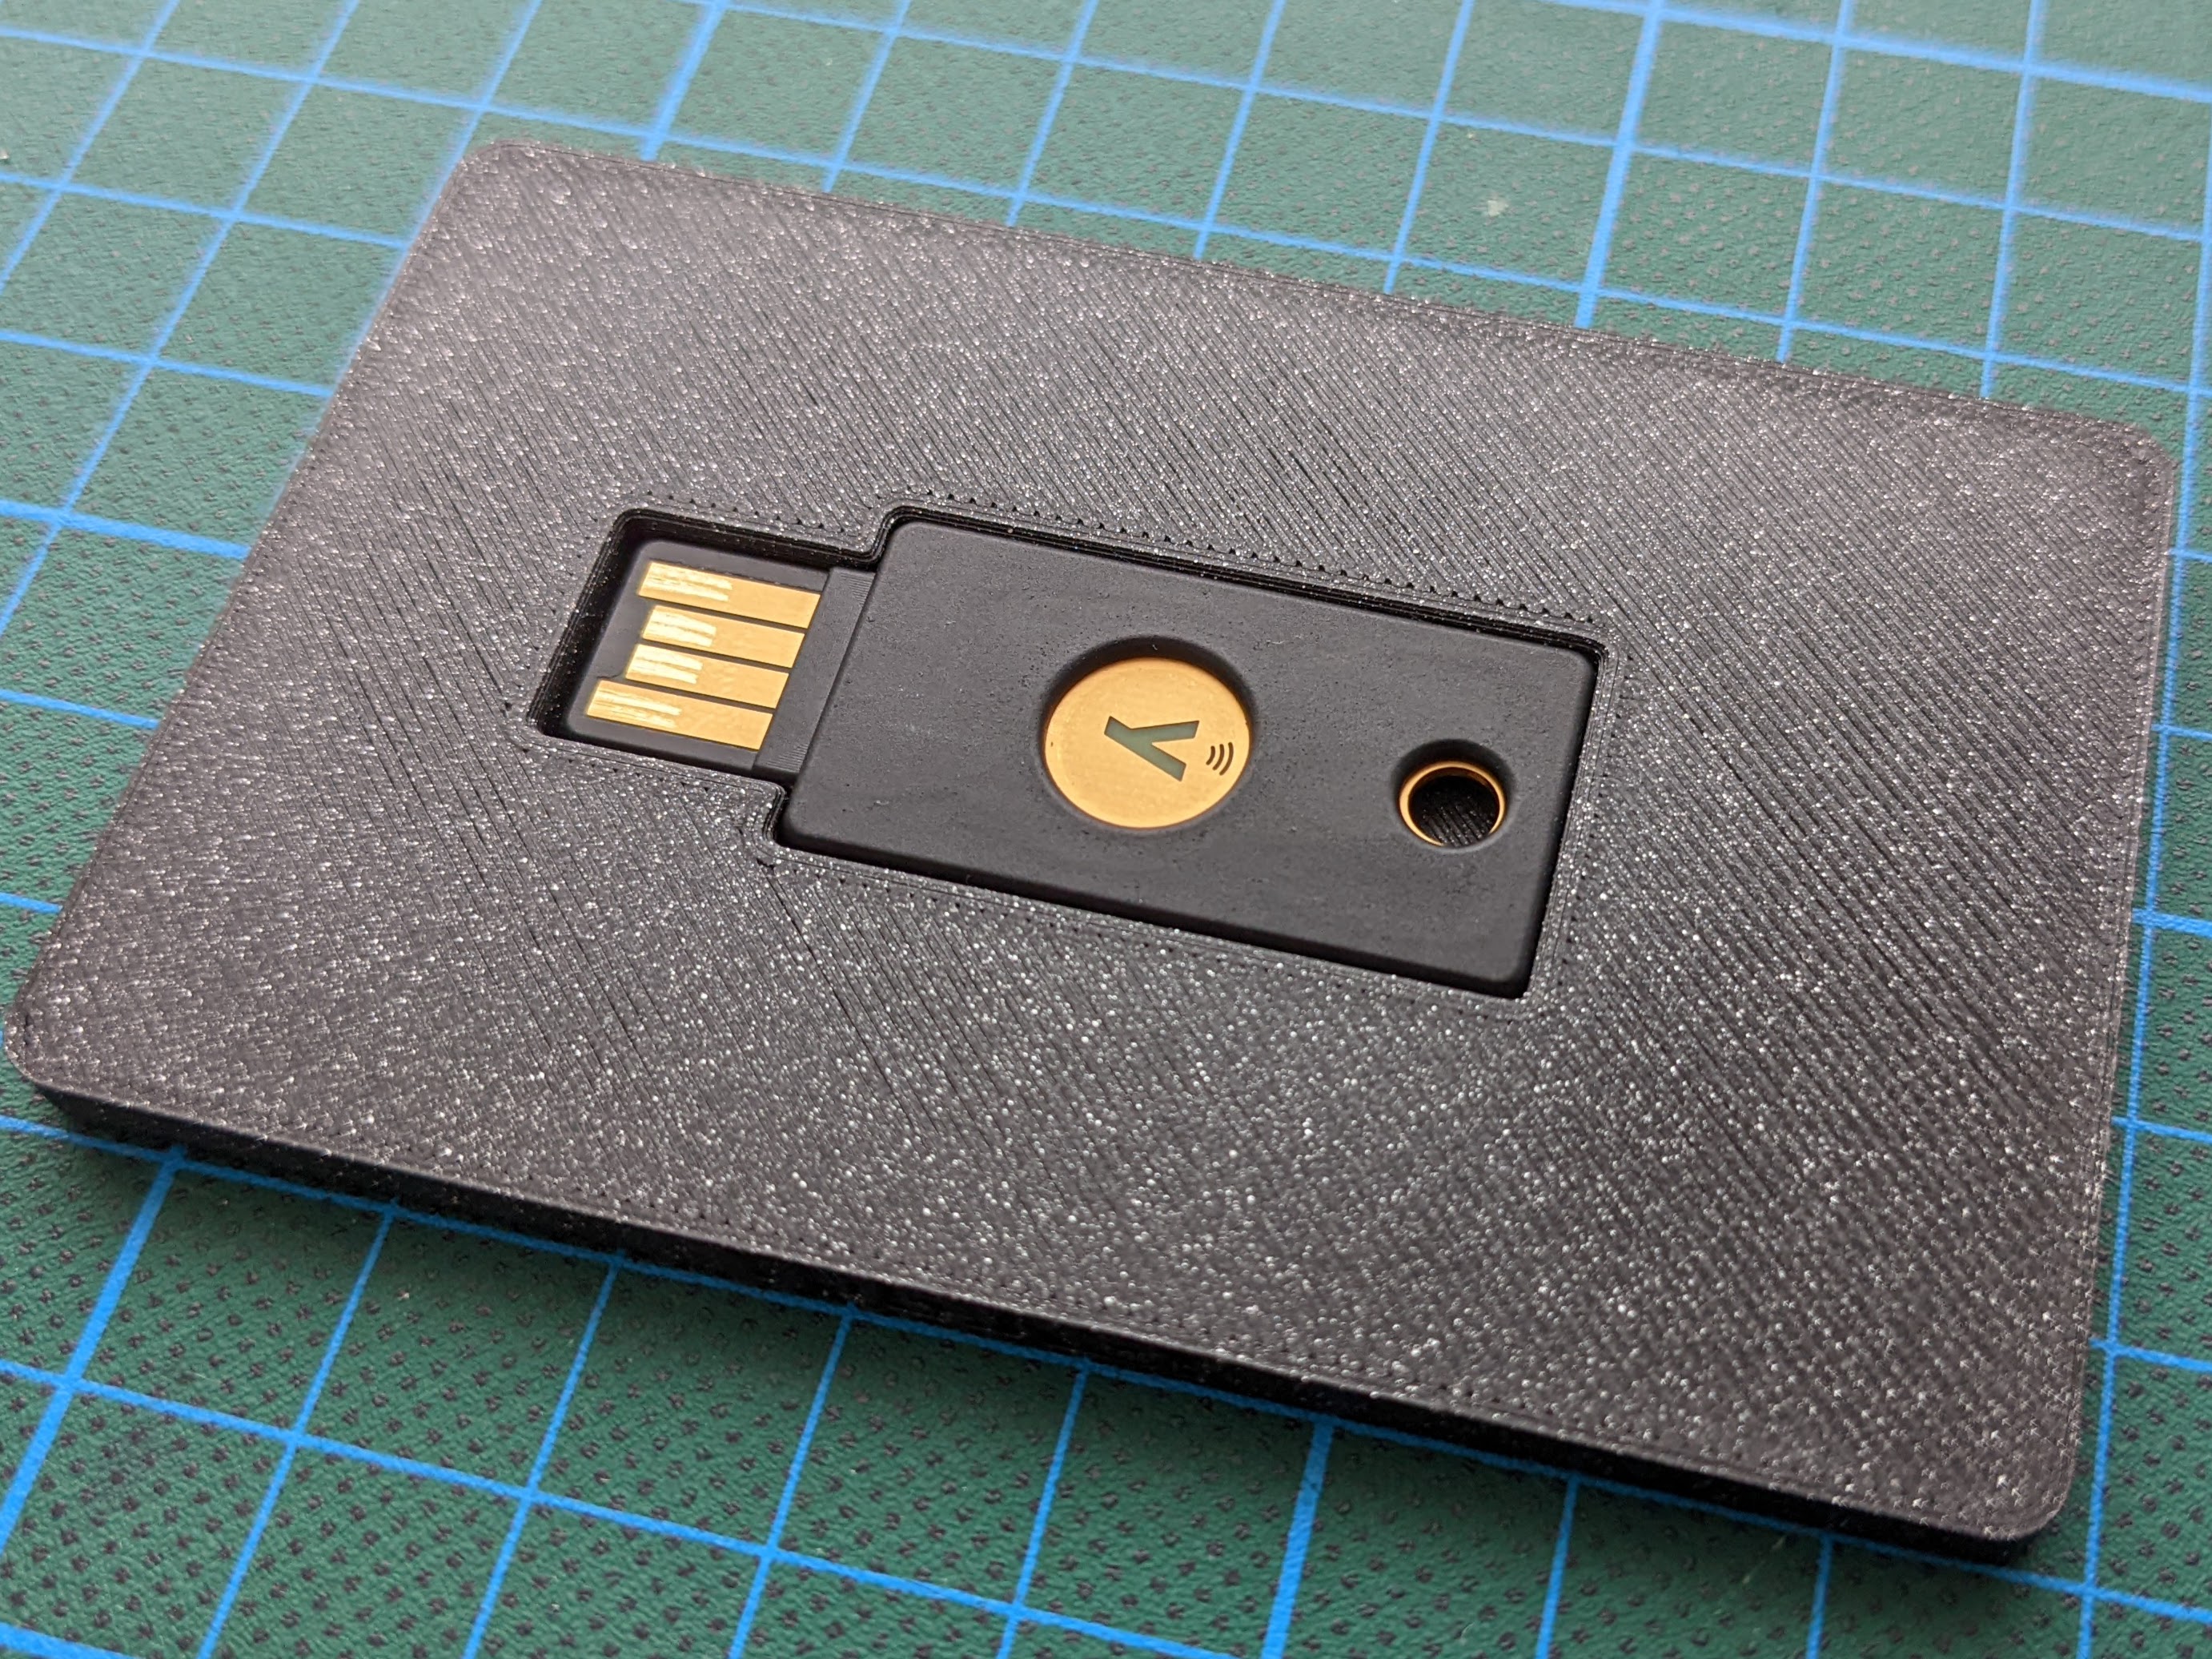 Yet Another YubiKey Credit Card Sized Case